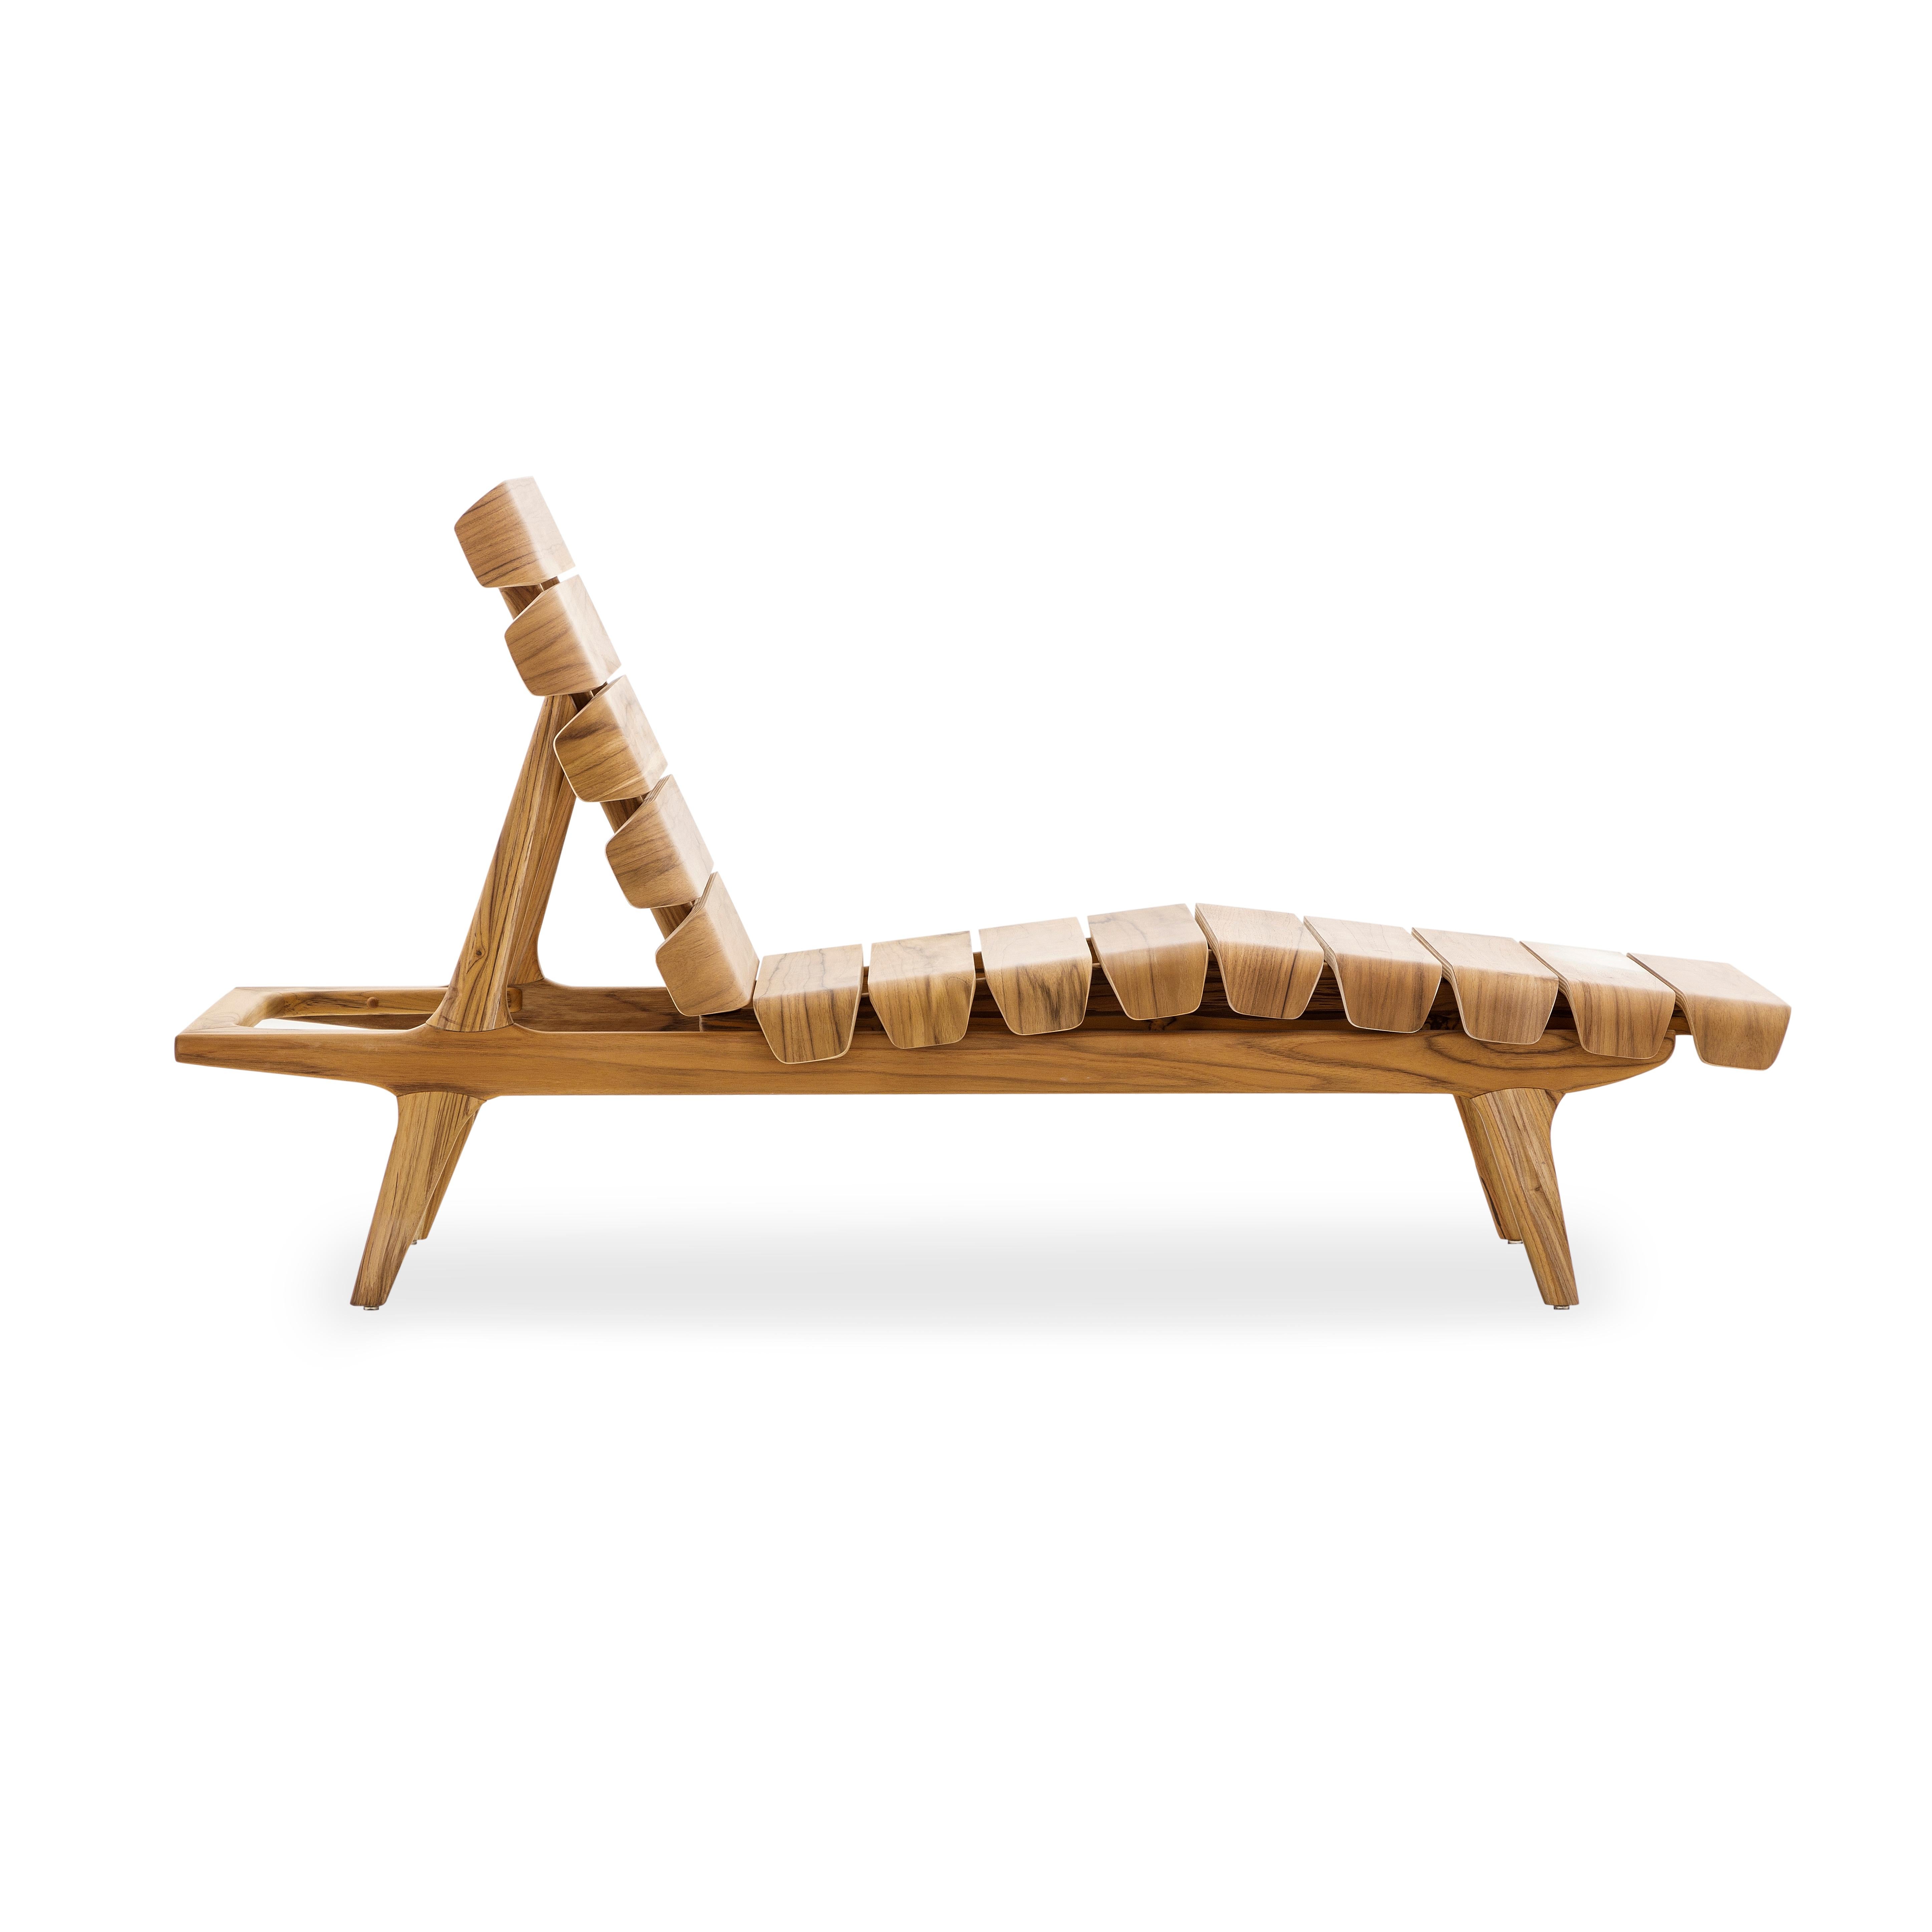 The Clave indoor chaise lounge in a monochromatic teak wood Uultis finish, all made from wood, is the perfect addition for any contemporary, minimalist, or traditional design project. This chaise is the ideal chair to relax and lounge with its